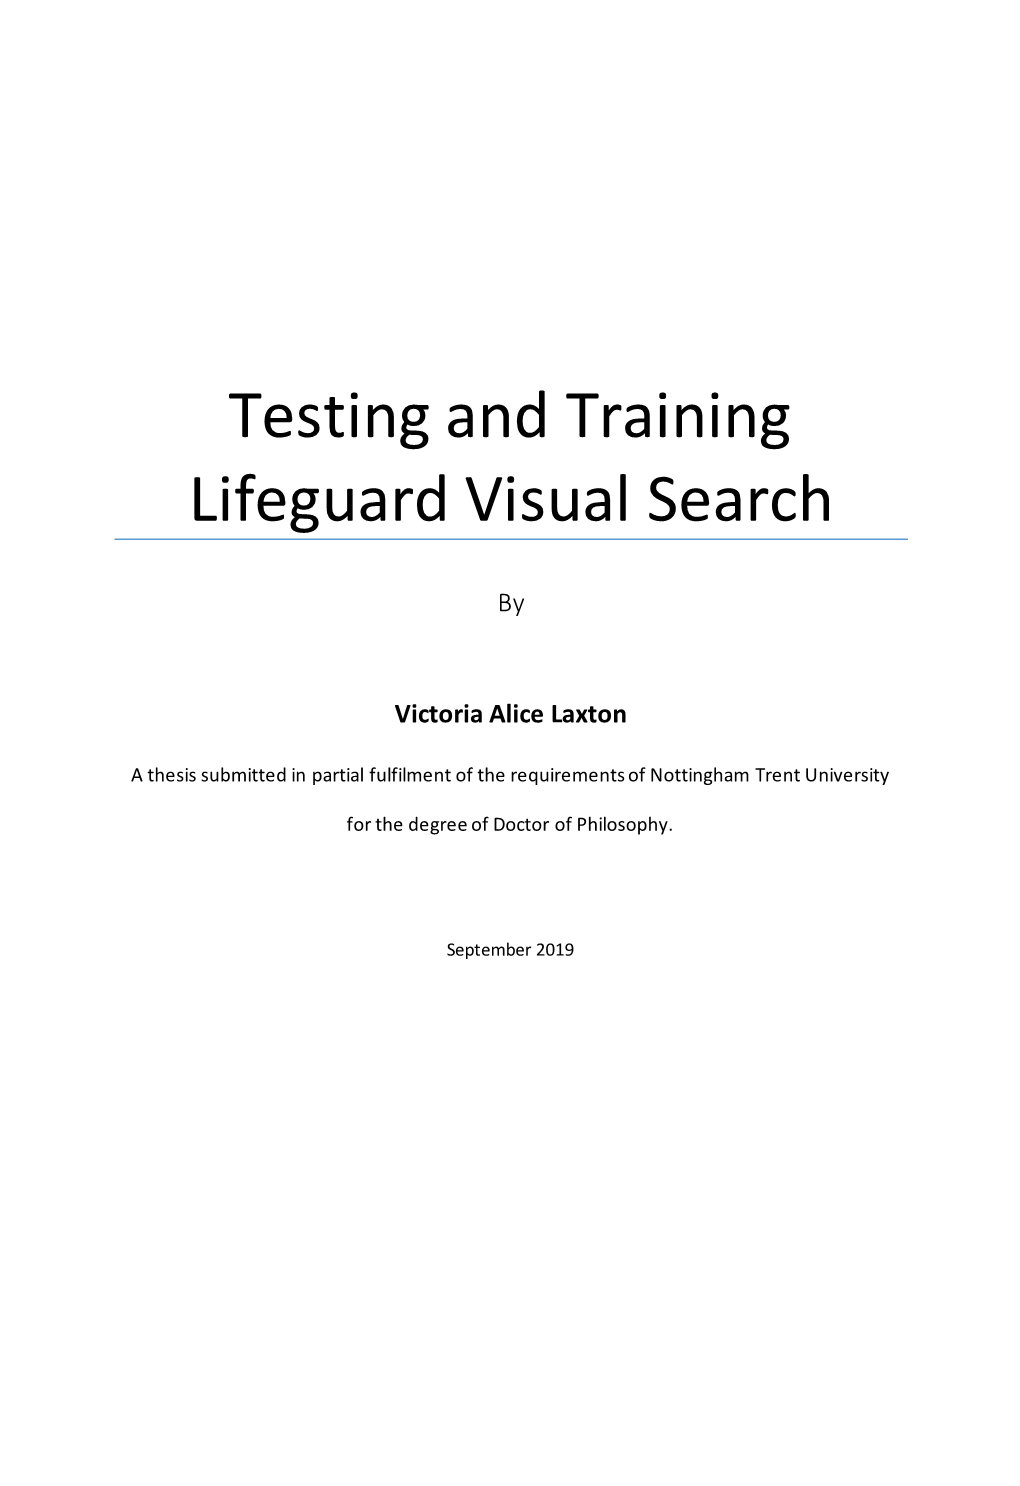 Testing and Training Lifeguard Visual Search